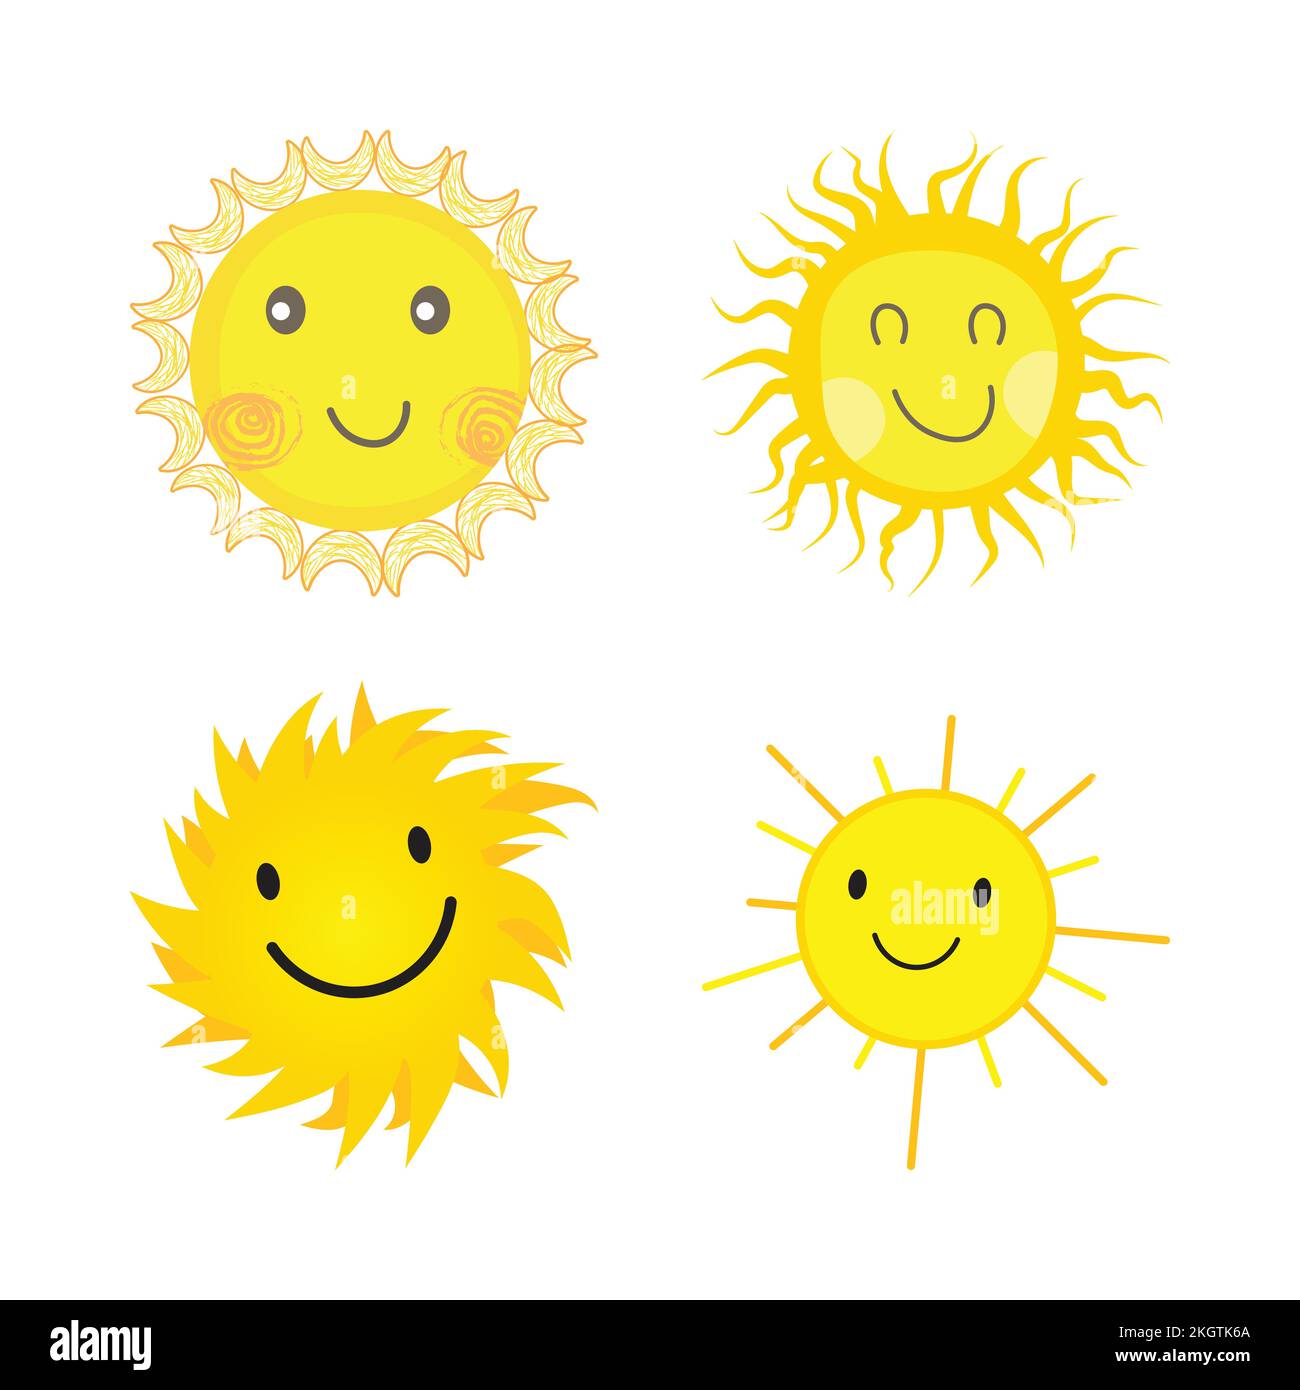 Cheerful Smile Face Star Stickers